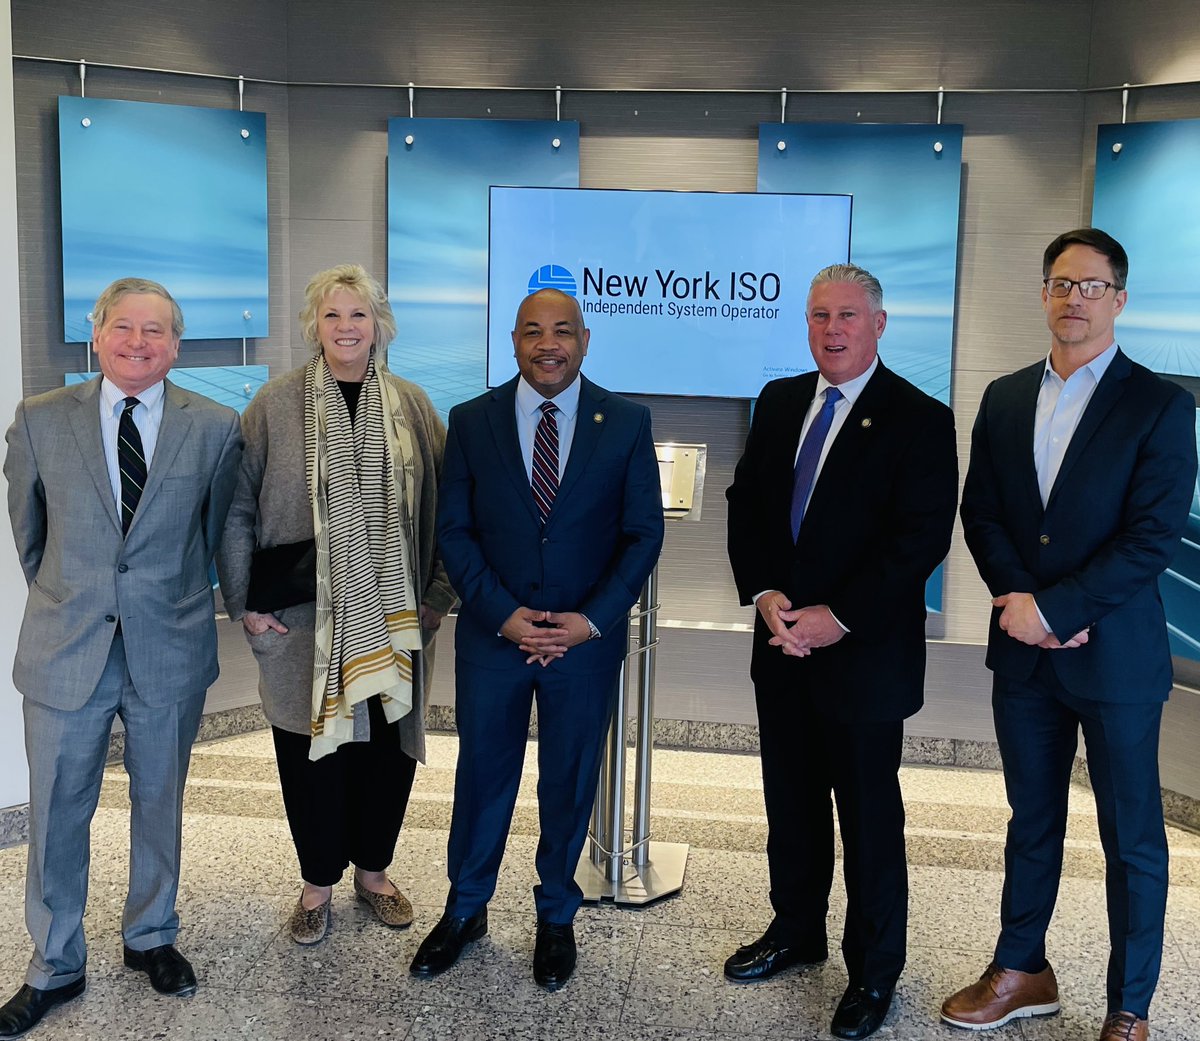 Joining @NYSA_Majority Speaker @CarlHeastie and colleagues @johnmcdonald108 & @SteveOtis91 to tour @NewYorkISO #gridofthefuture #reliable #affordable